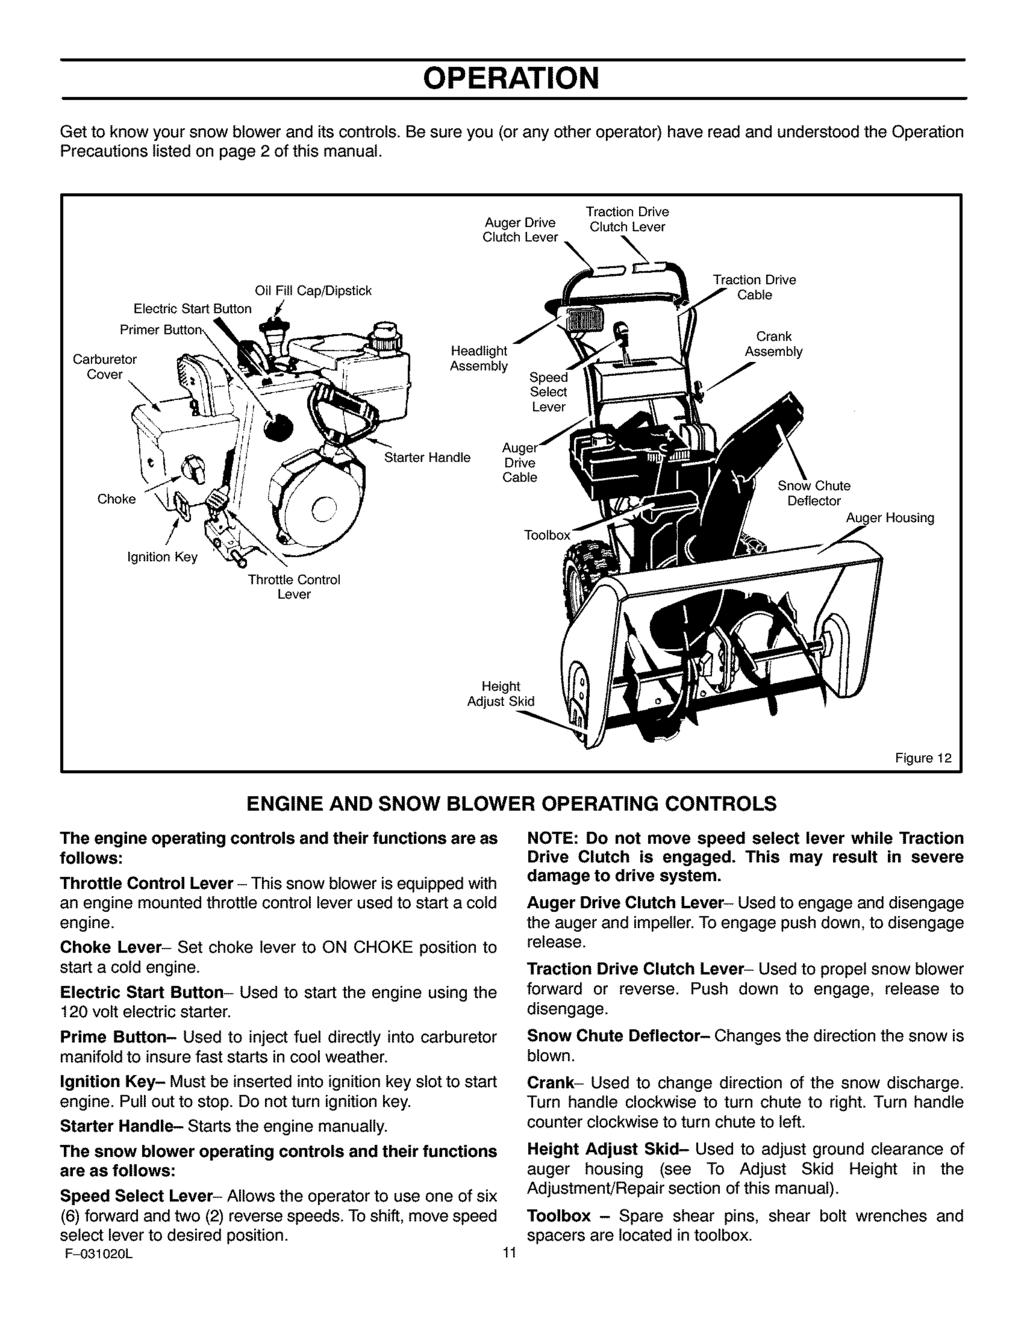 OPERATION Get to know your snow blower and its controls. Be sure you (or any other operator) have read and understood the Operation Precautions listed on page 2 of this manual.